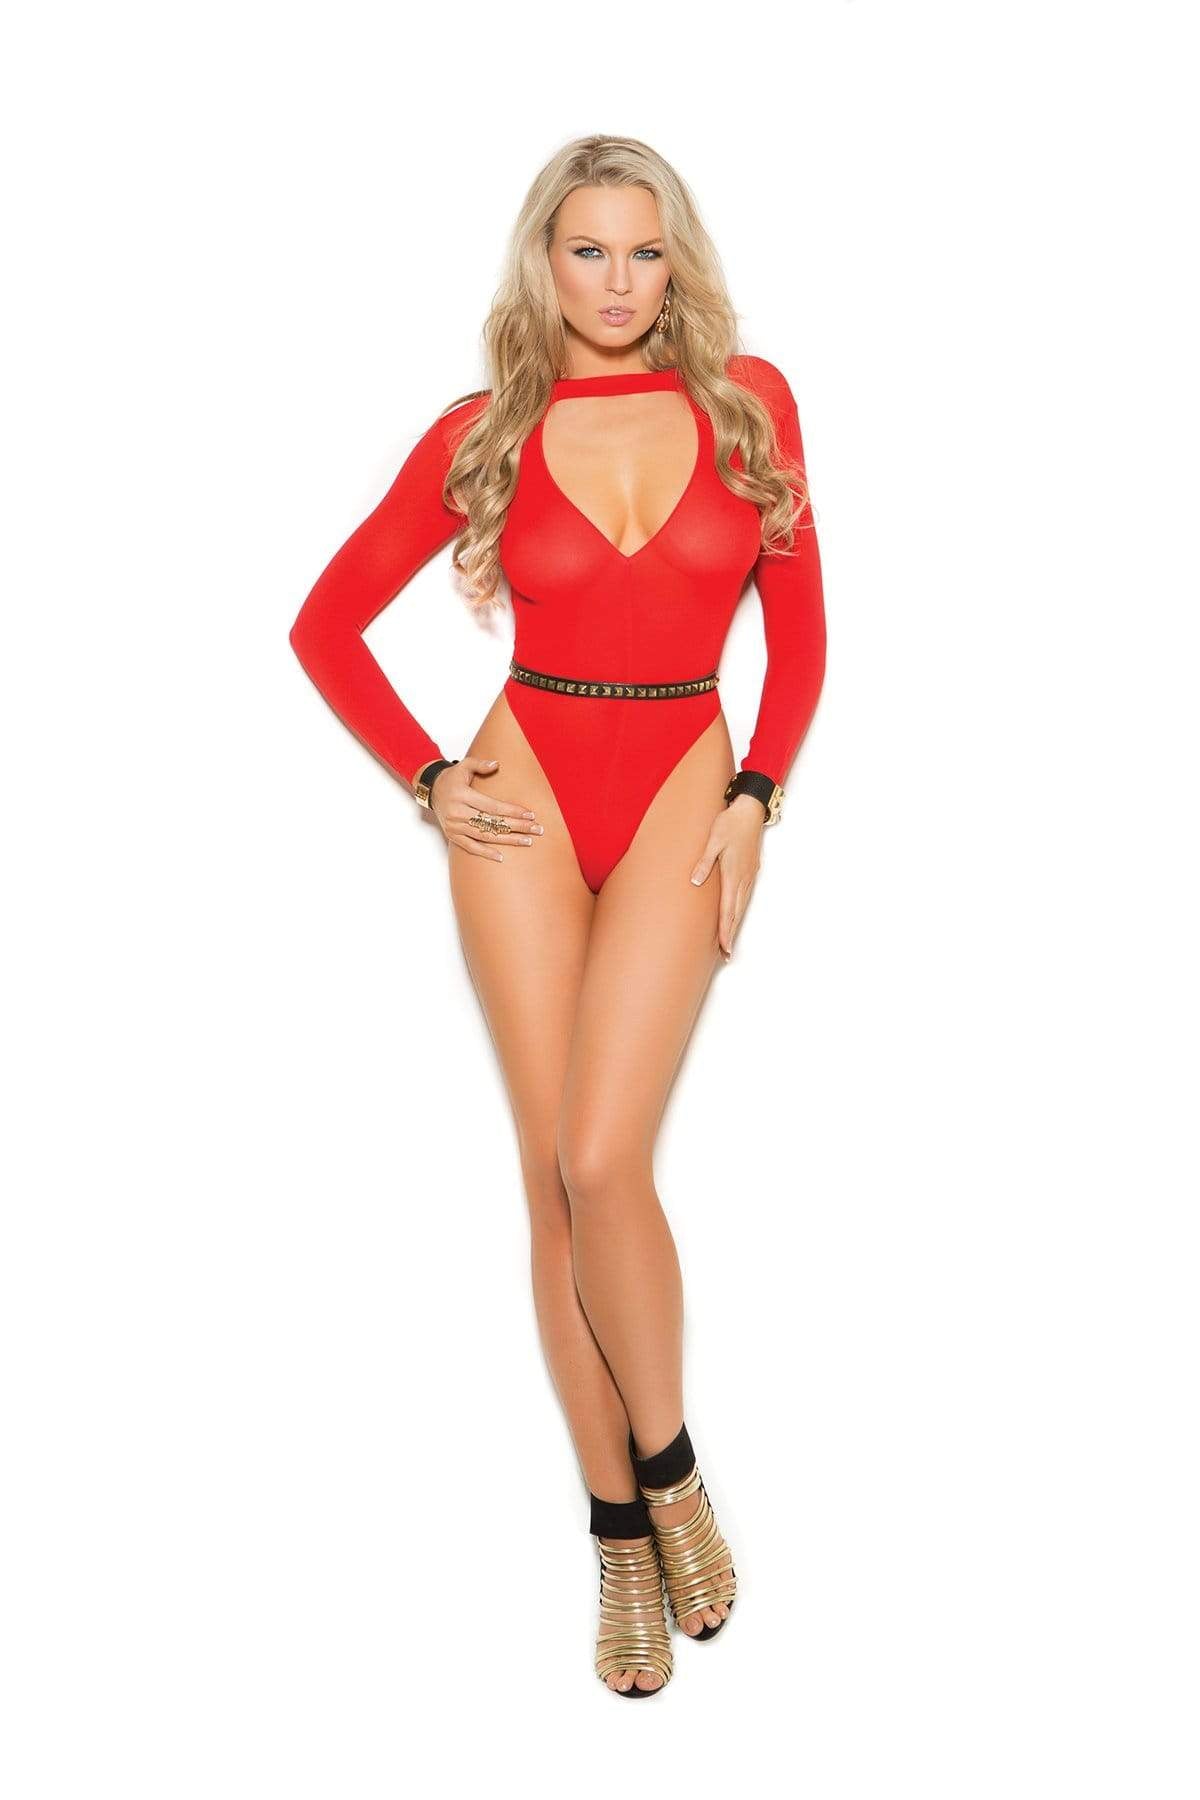 Elegant Moments One Size / Red Sexy Red Sheer Keyhole Long Sleeve Cheeky Bodysuit SHC-1275-RED-O/S-EB Sexy Black Sheer Fishnet Teddy Mesh Bodysuit Festival Lingerie Dance Apparel &amp; Accessories &gt; Clothing &gt; Underwear &amp; Socks &gt; Lingerie